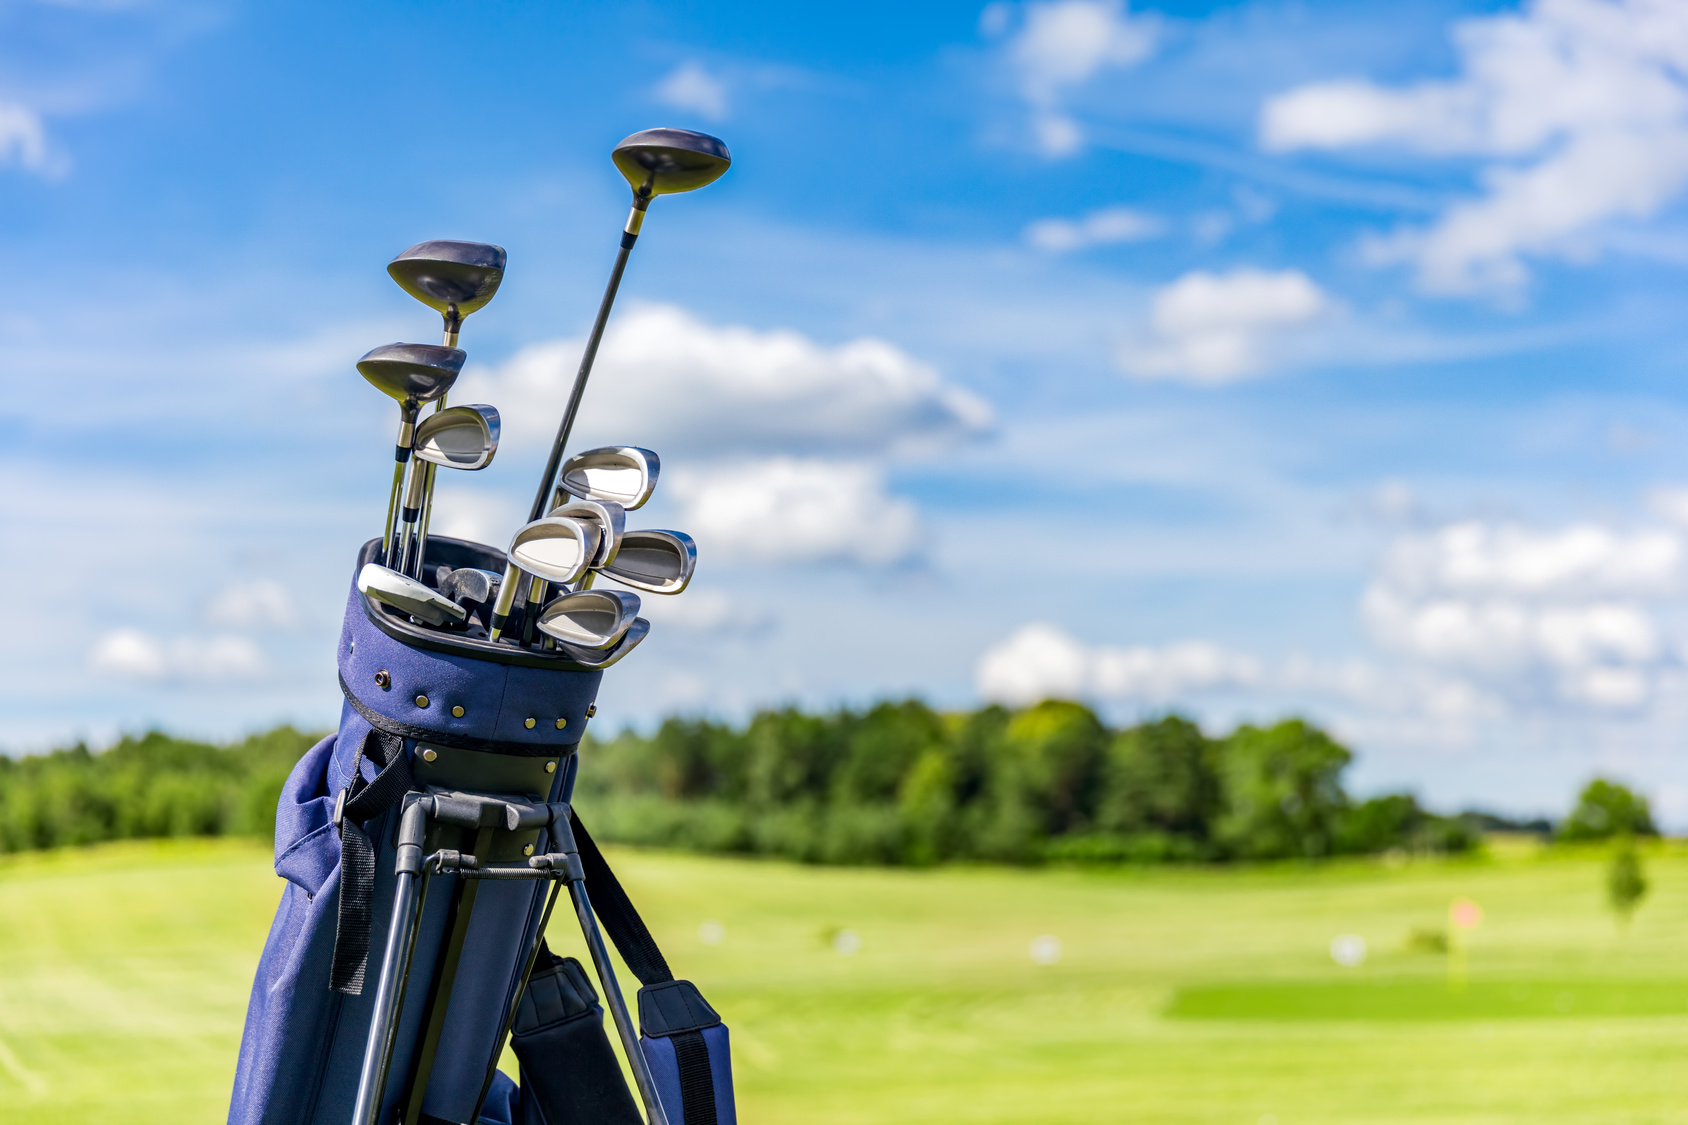 Do You Really Need 14 Clubs? – The Ohio Golf Journal